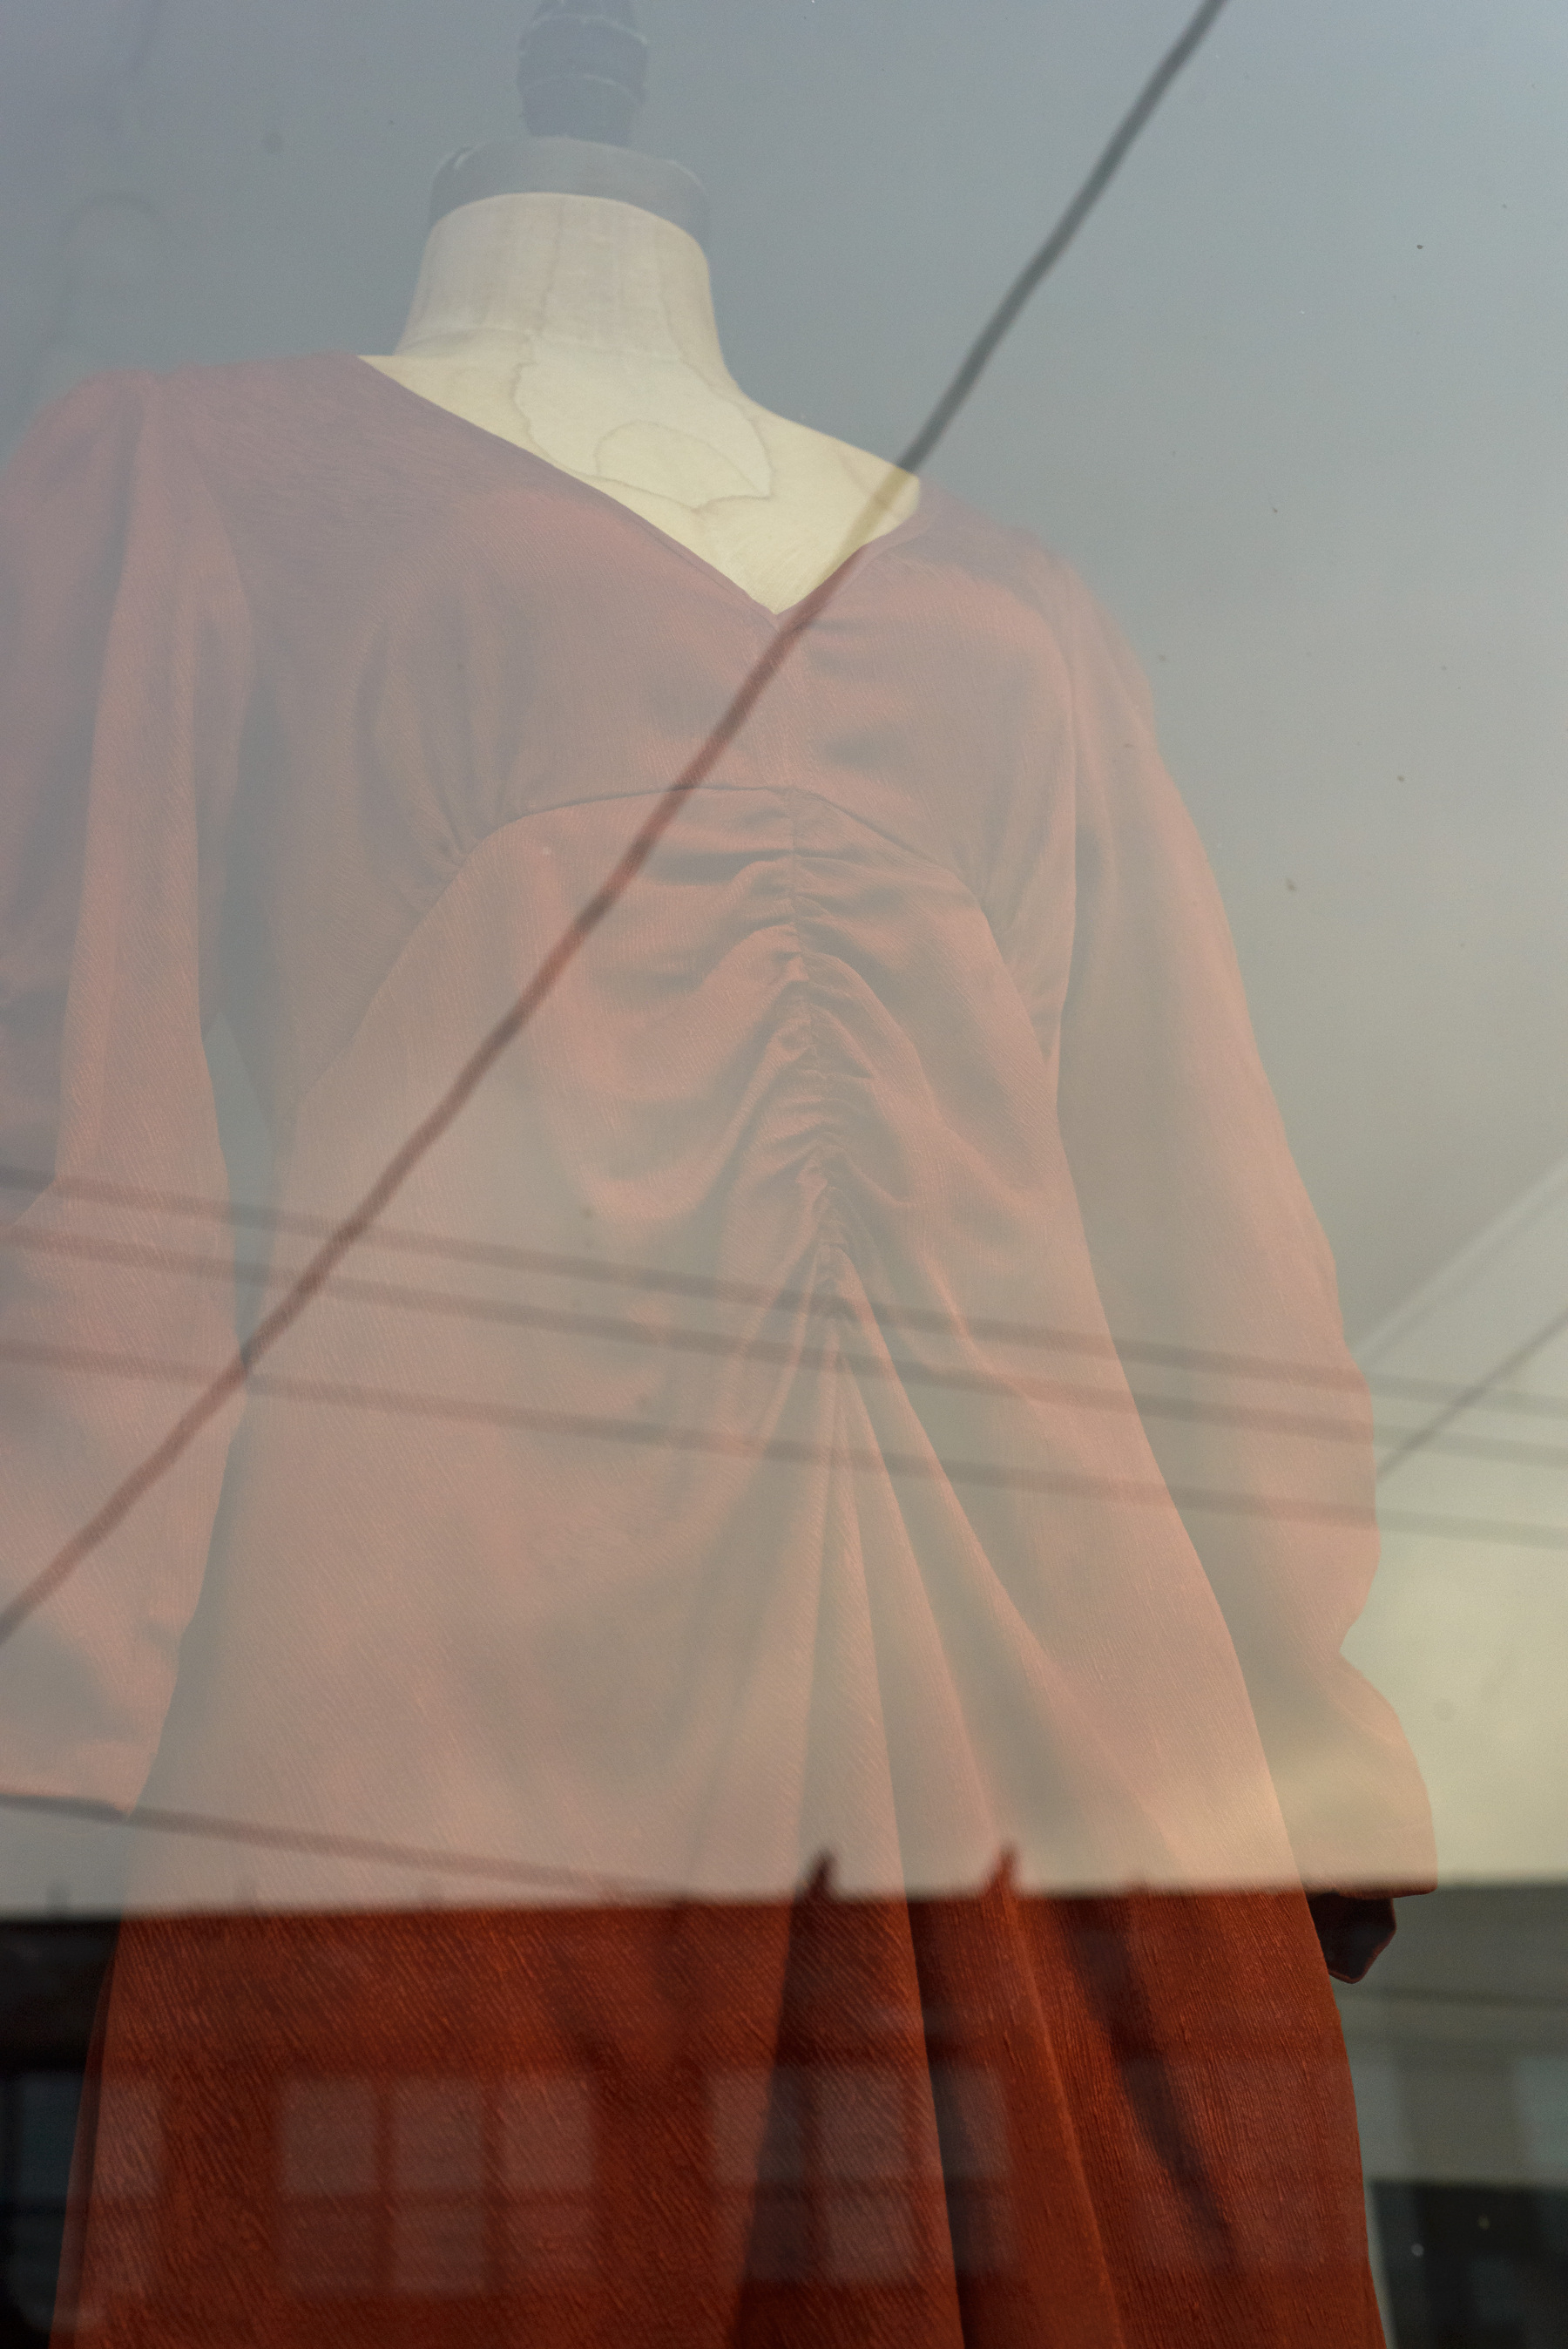 Mannequin with rust colored sundress in a shop window with sky, wires and buildings reflected in the window.